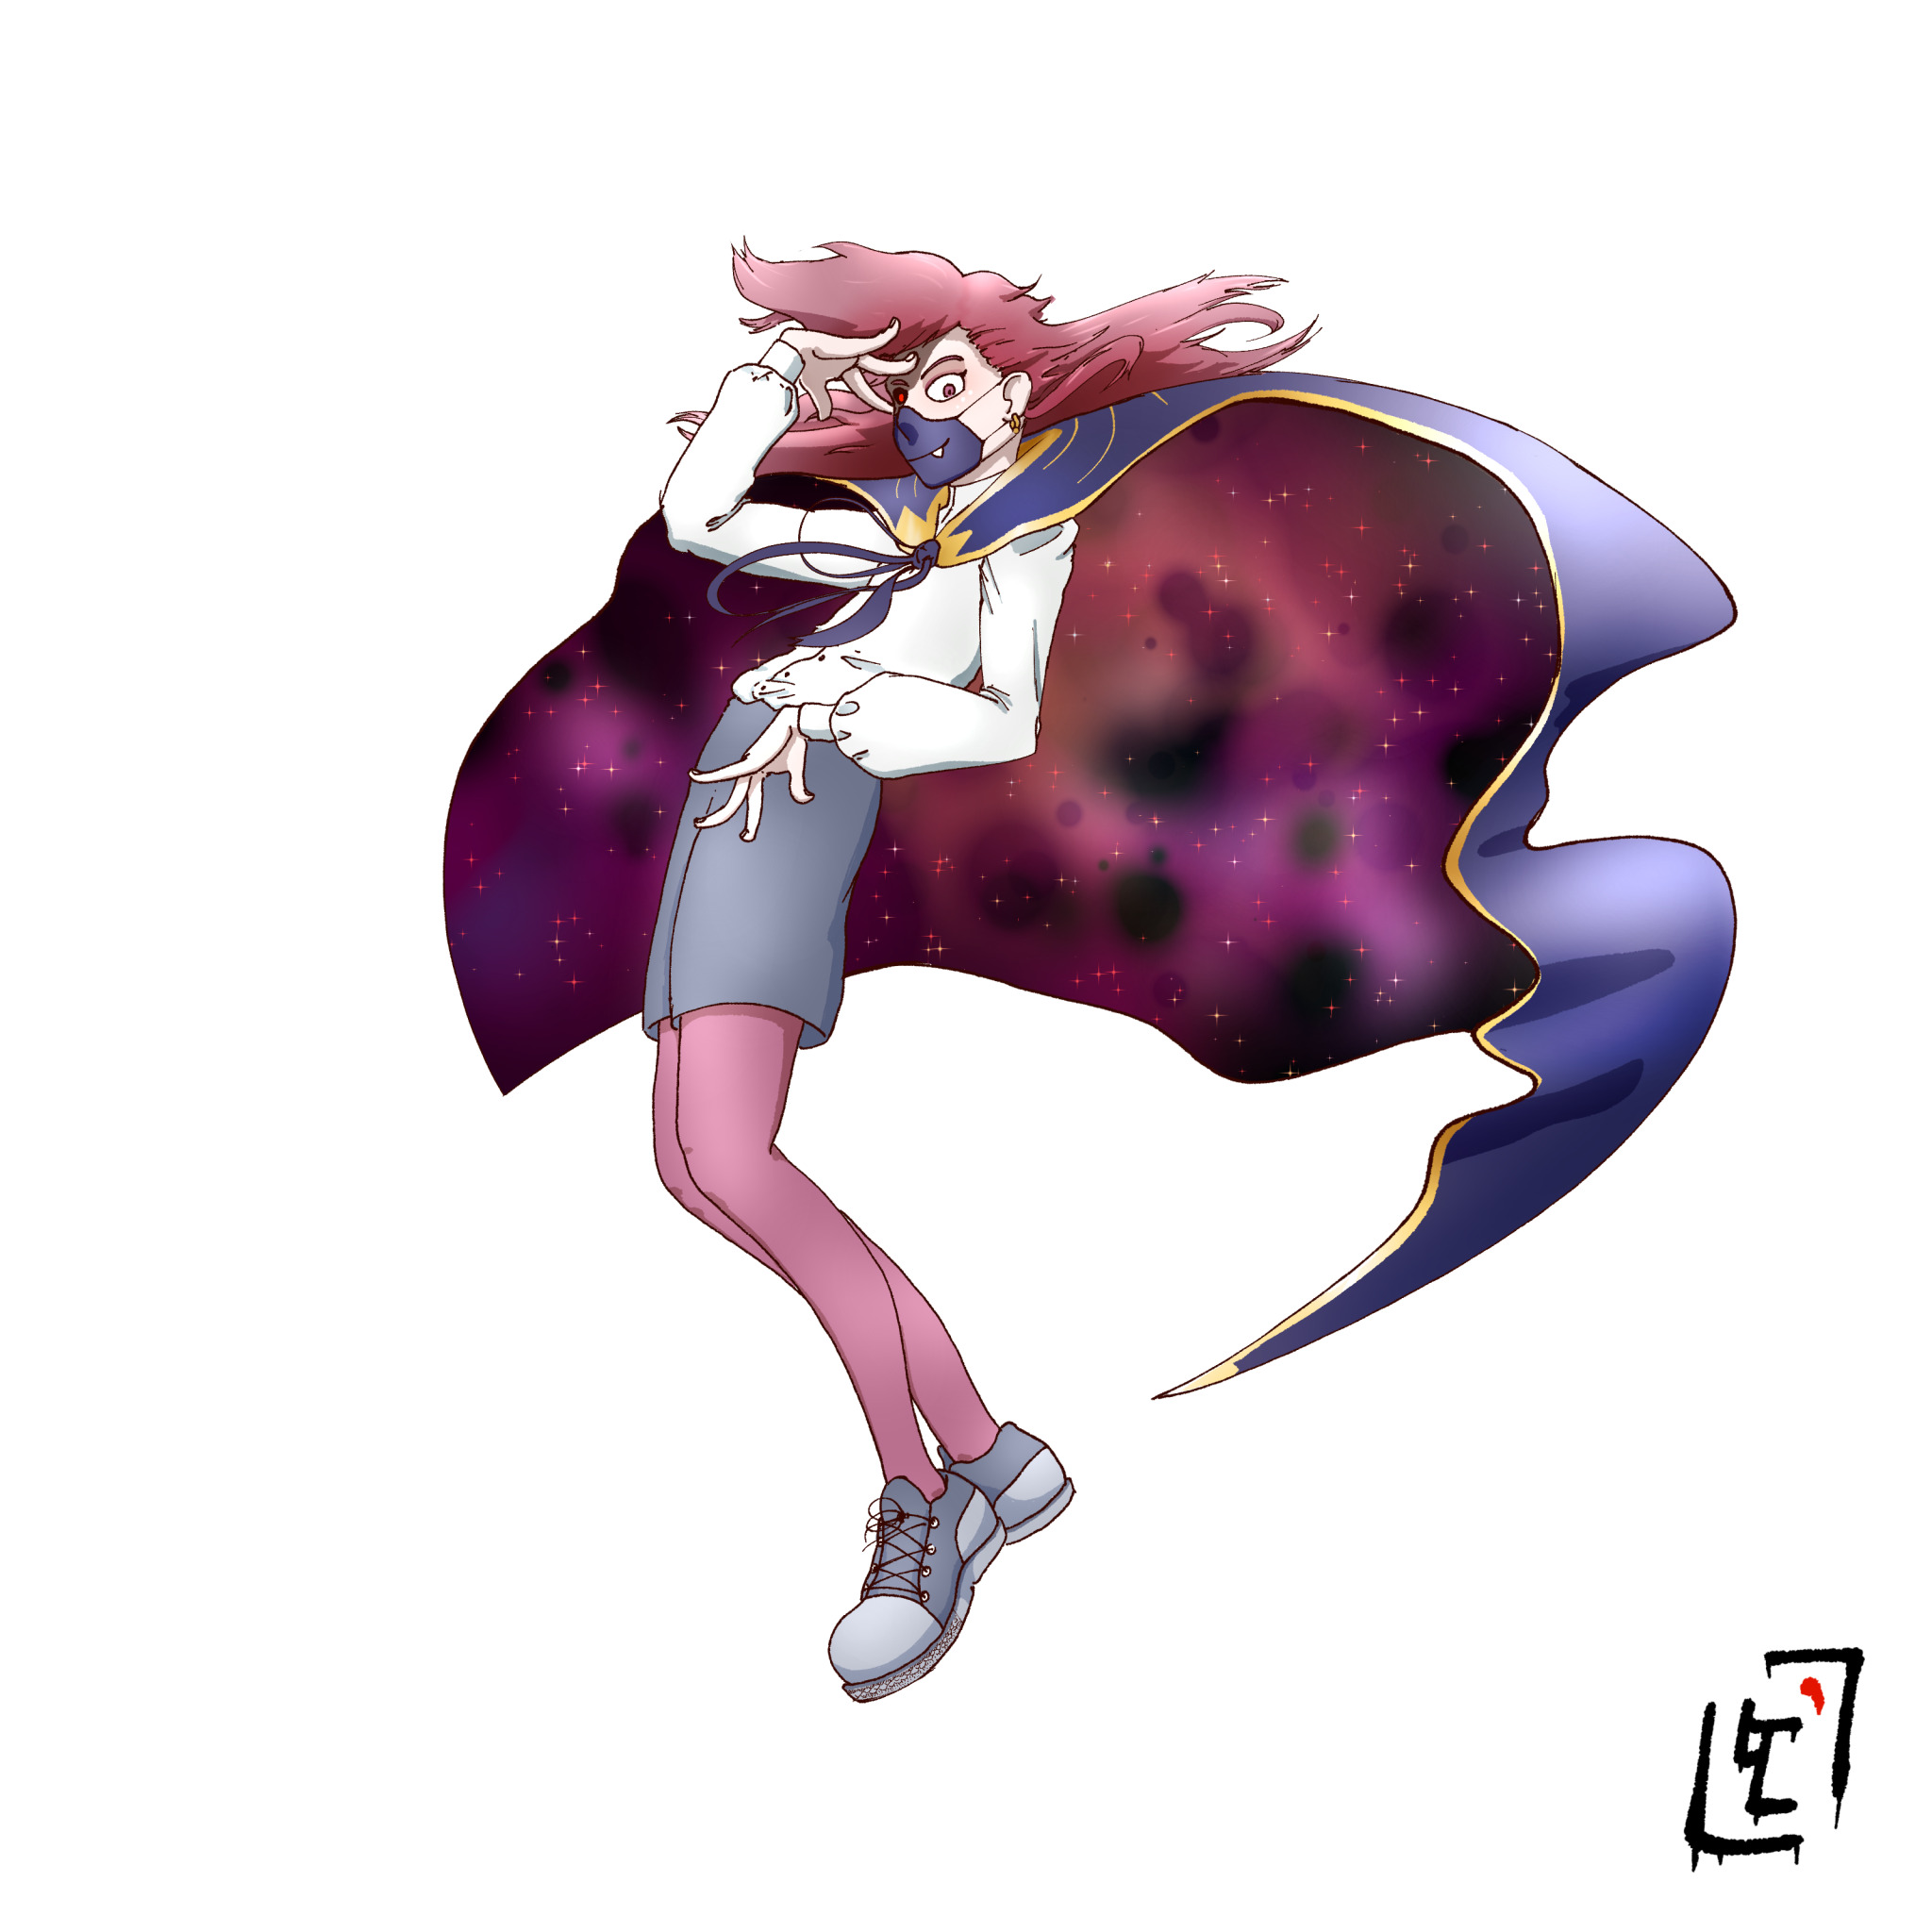 A human in a dramatic pose, wearing a billowing cape. The cosmos can be seen in the inside of the cape.